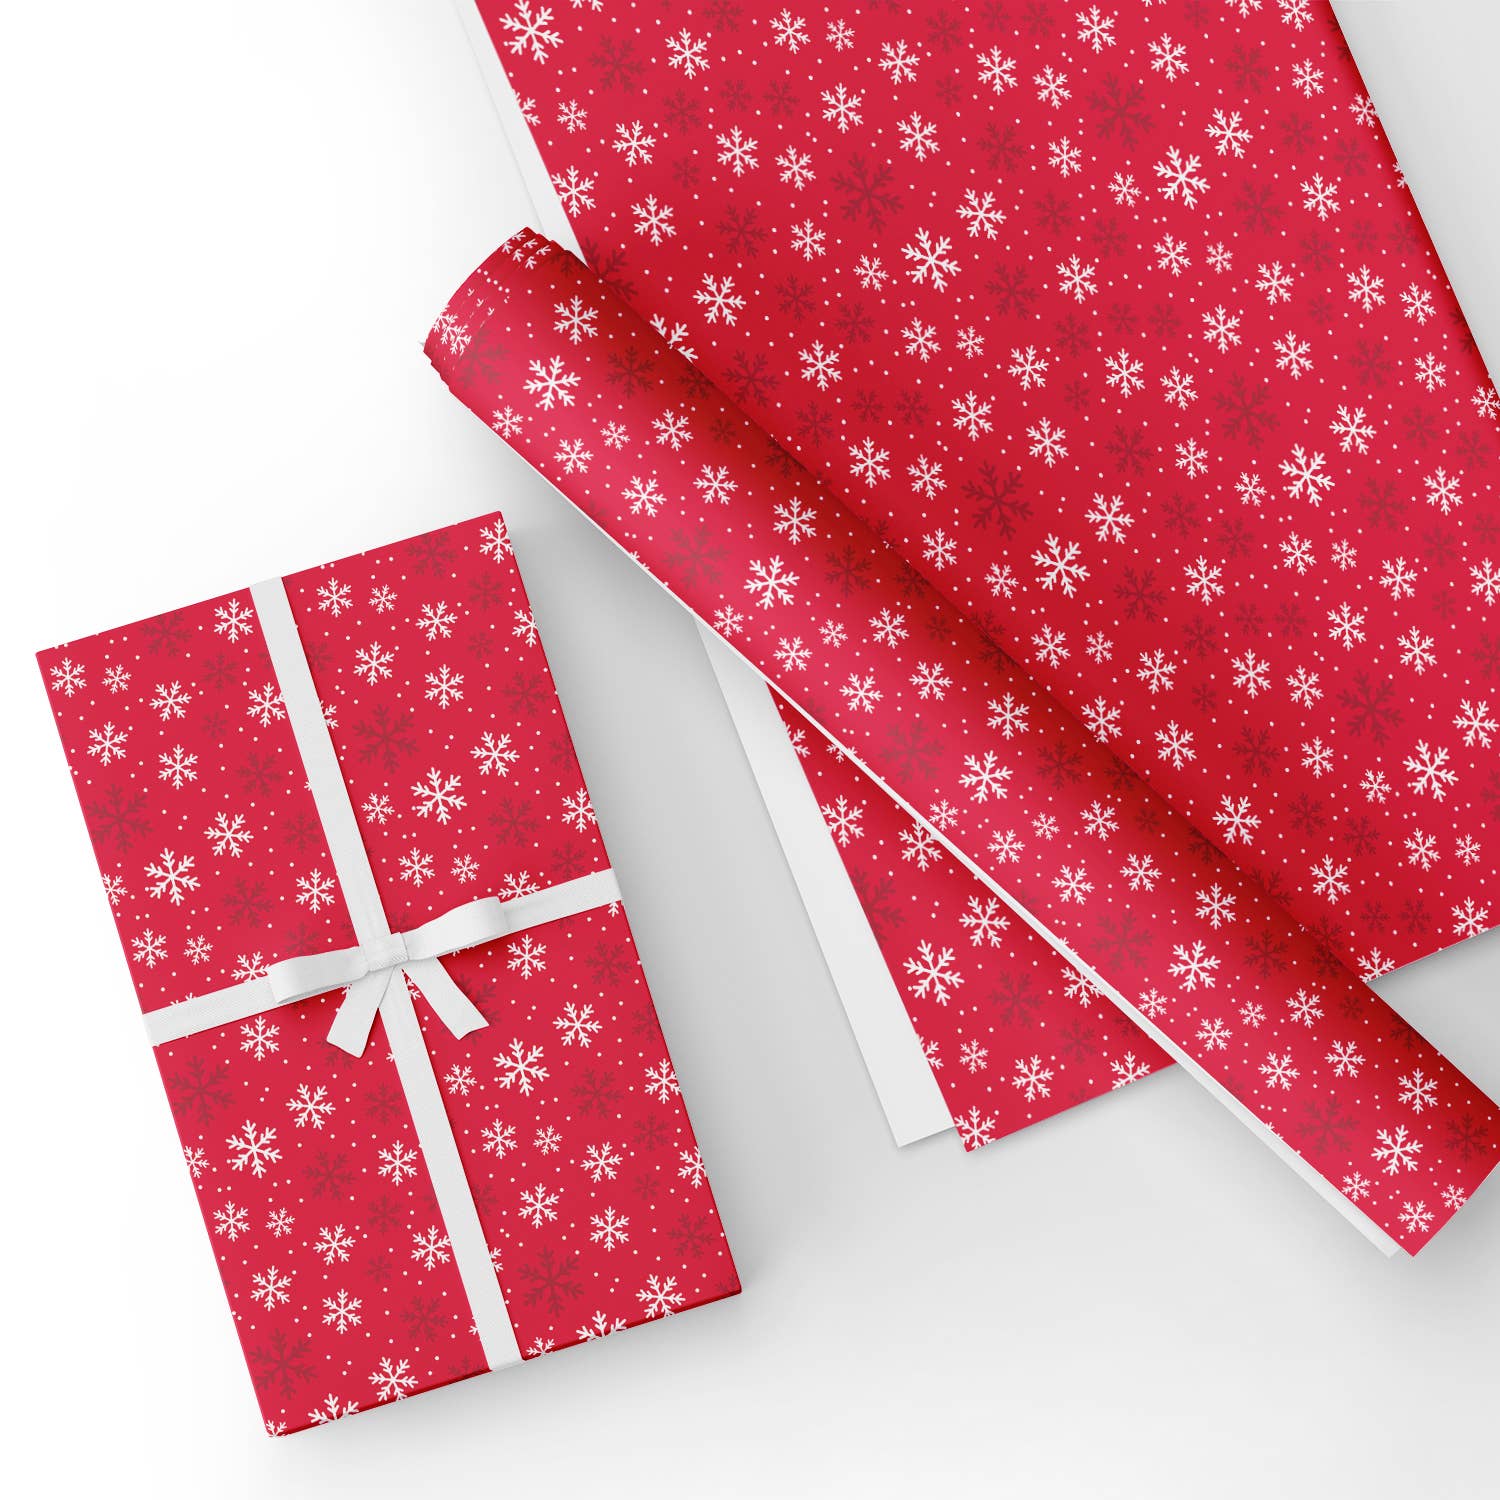 White and Red Snowflakes Flat Wrapping Paper Sheet Wholesale Wraphaholic